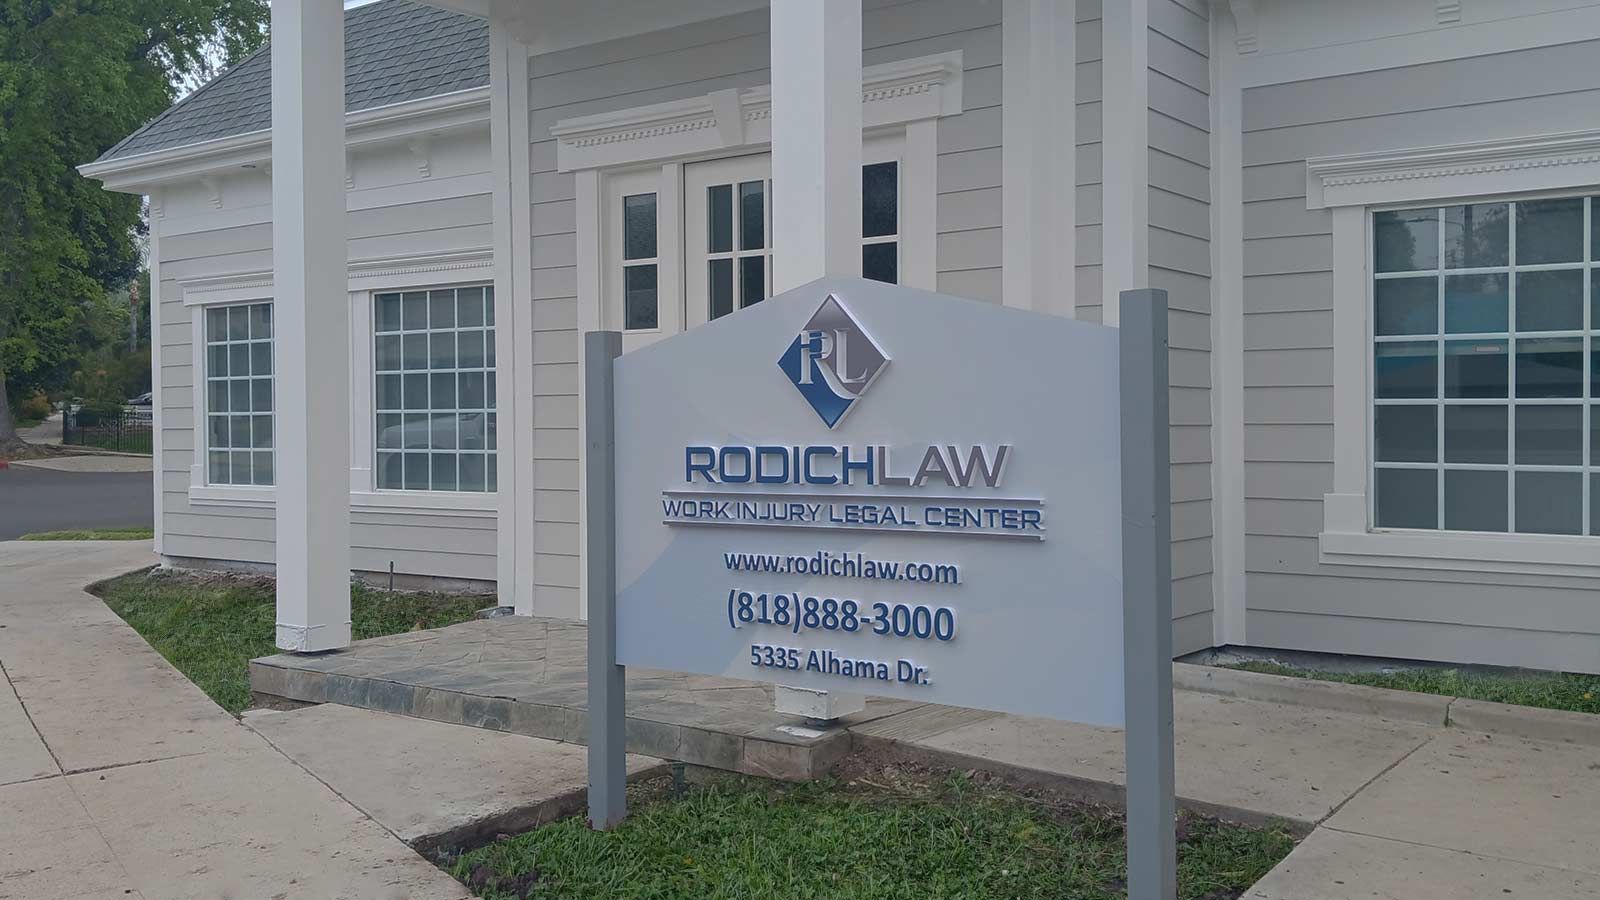 Rodich Law yard sign placed in front of the building